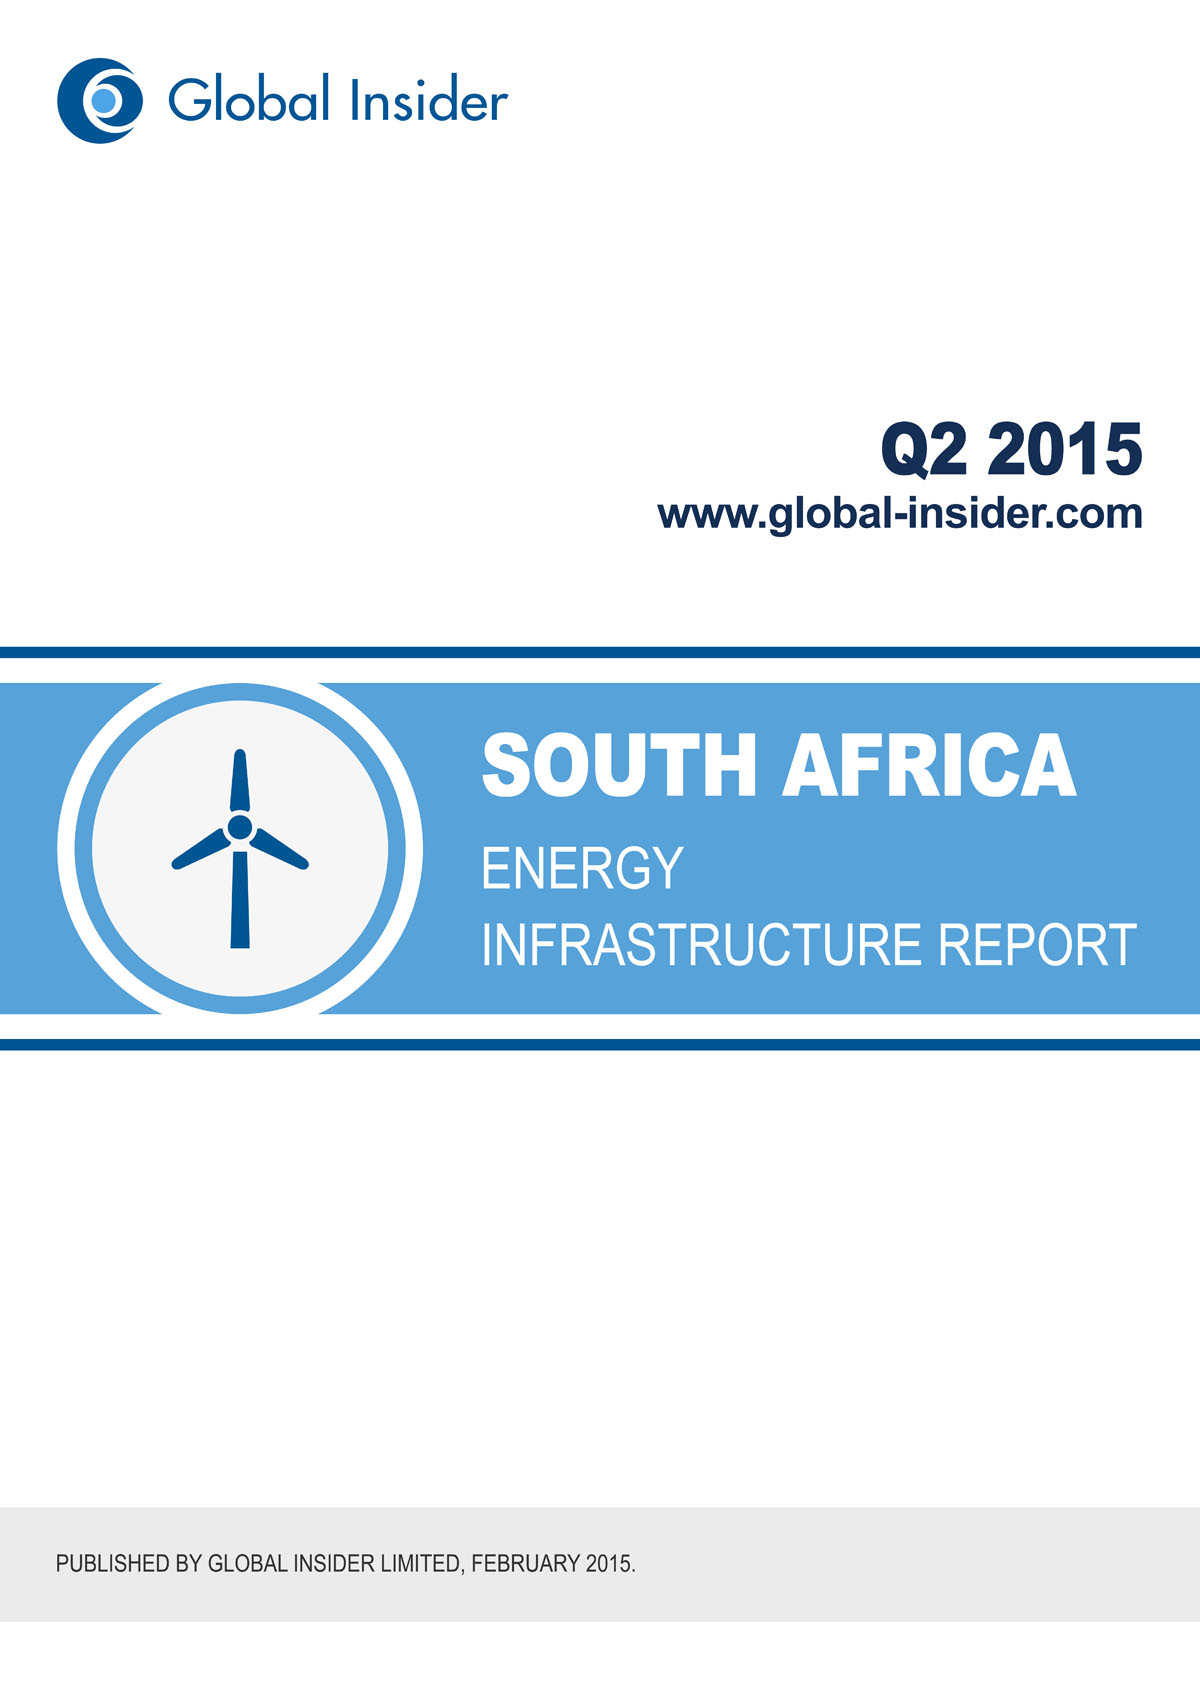 South Africa Energy Infrastructure Report